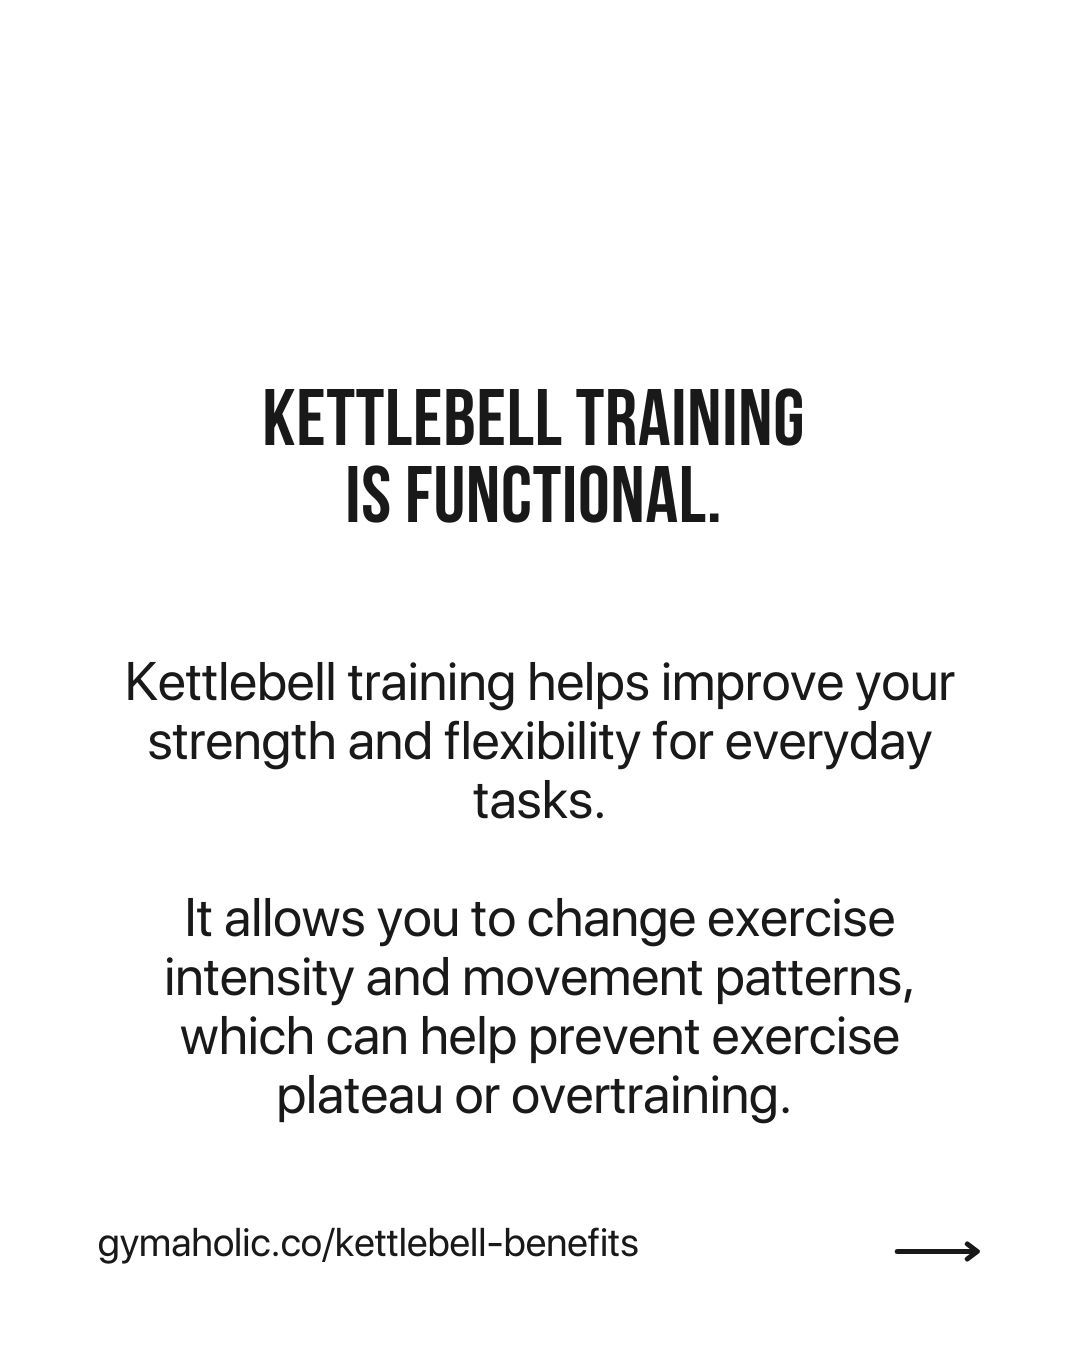 Kettlebell training is very effective to build full-body strength and improve